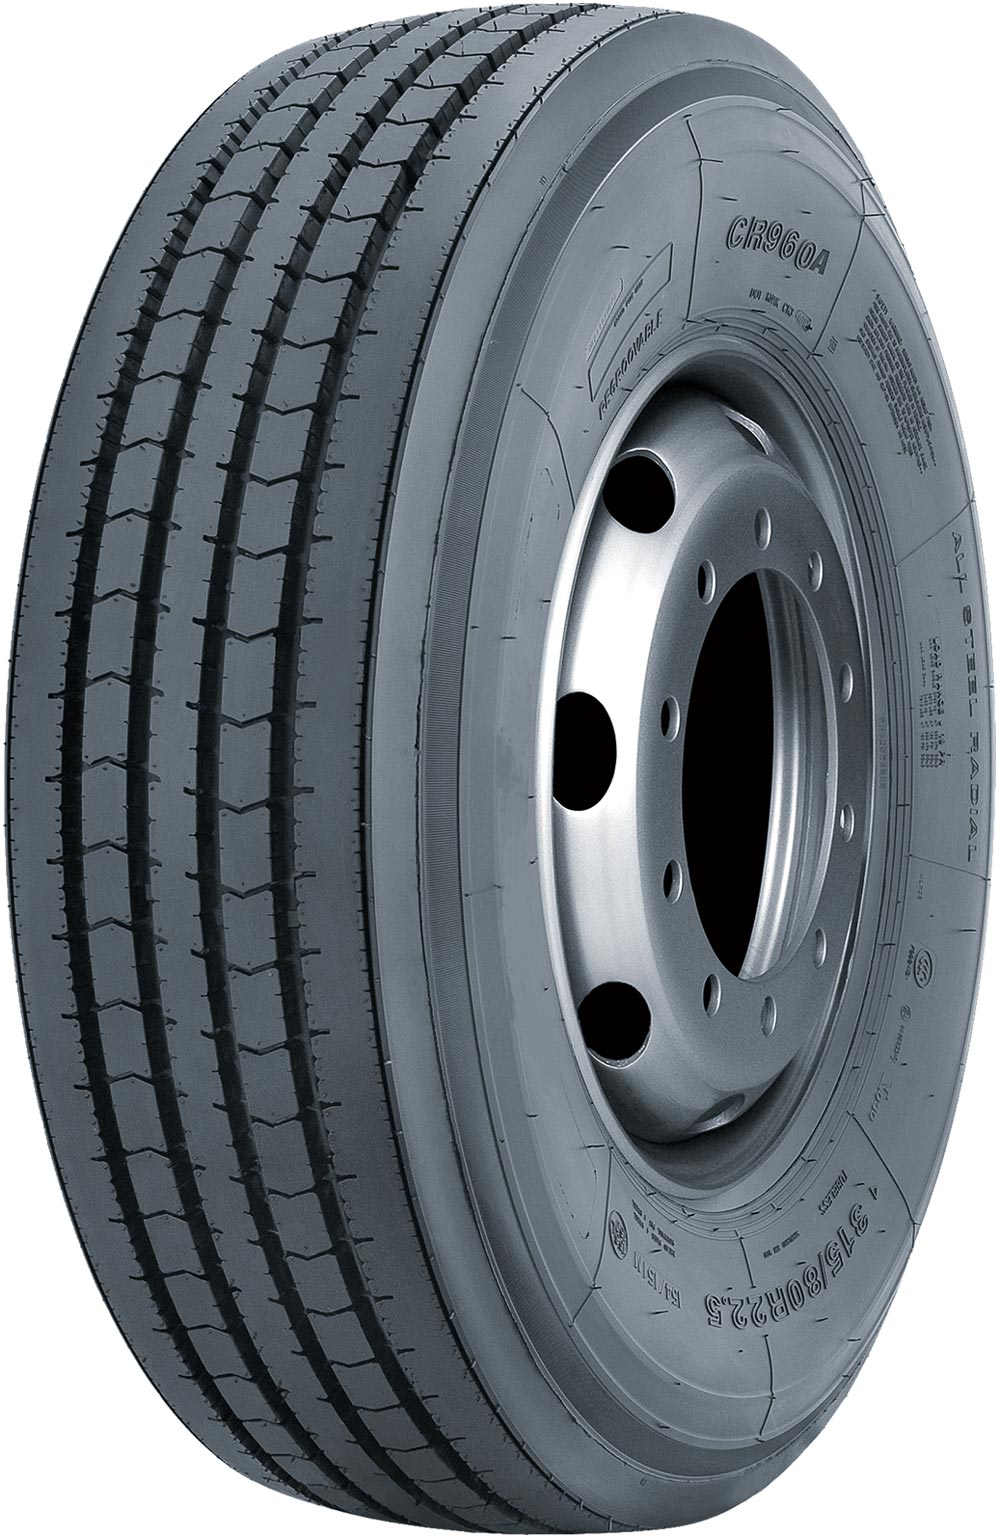 product_type-heavy_tires GOODRIDE CR960A 285/70 R19.5 146K